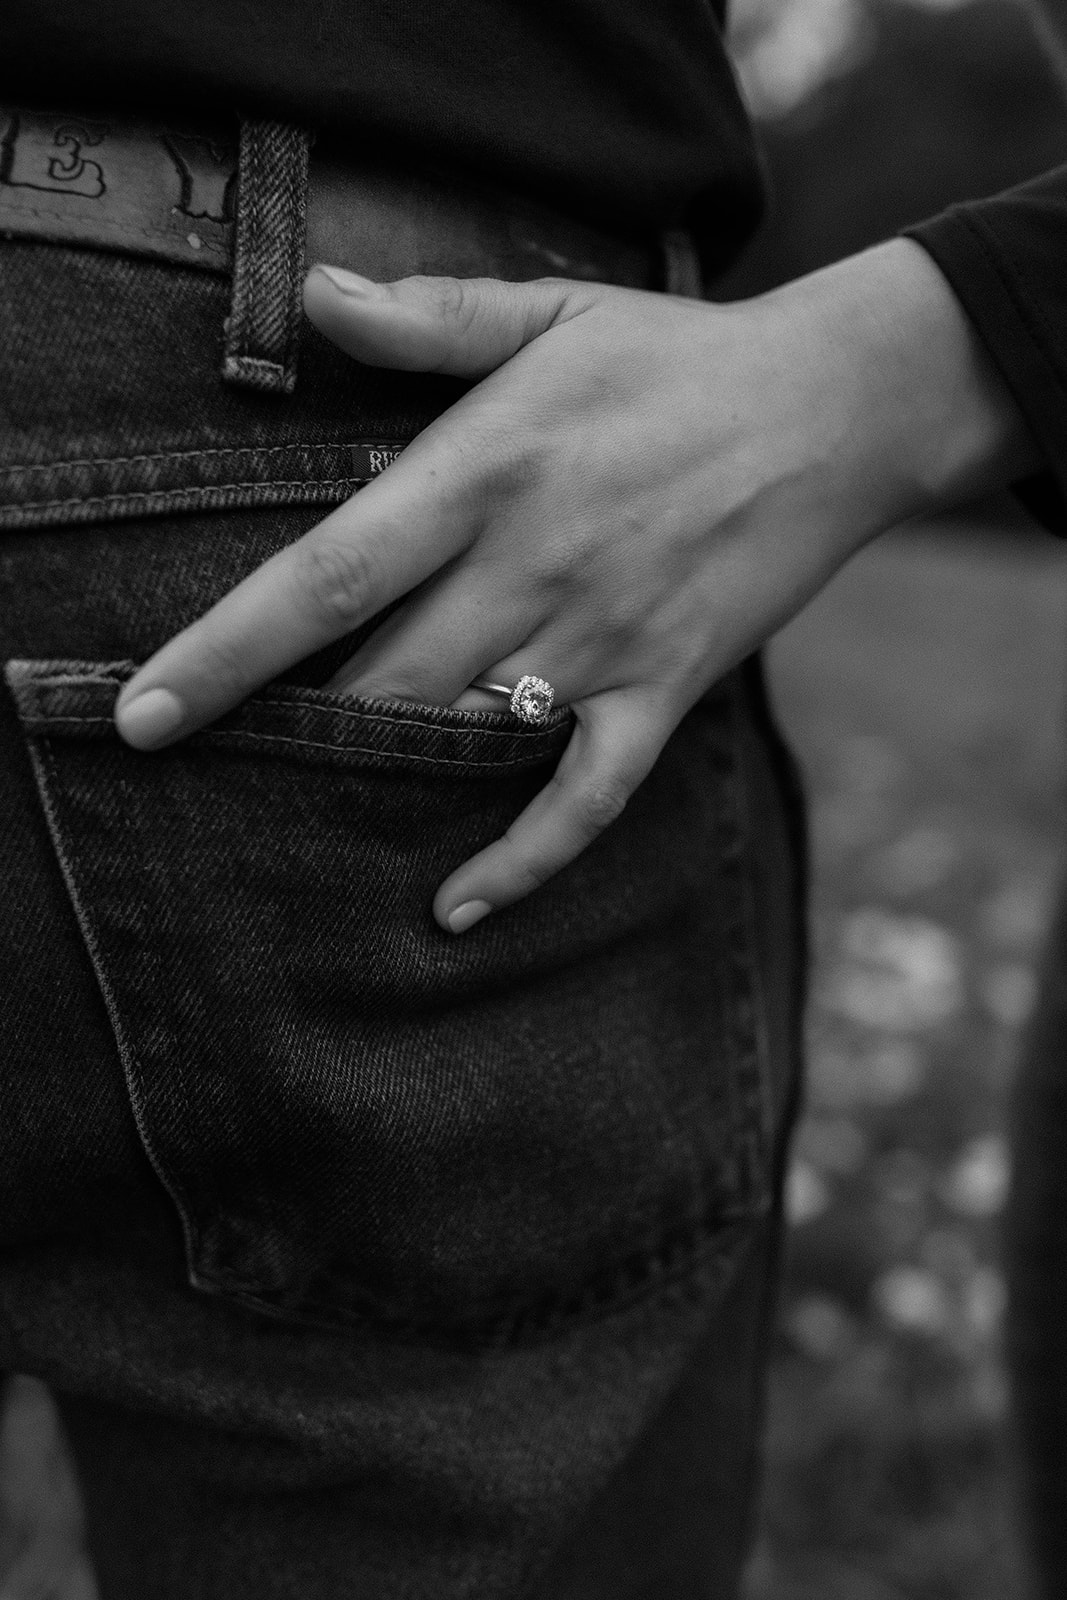 Detail photo of an engagement ring during a dreamy upstate New York autumn engagement photoshoot